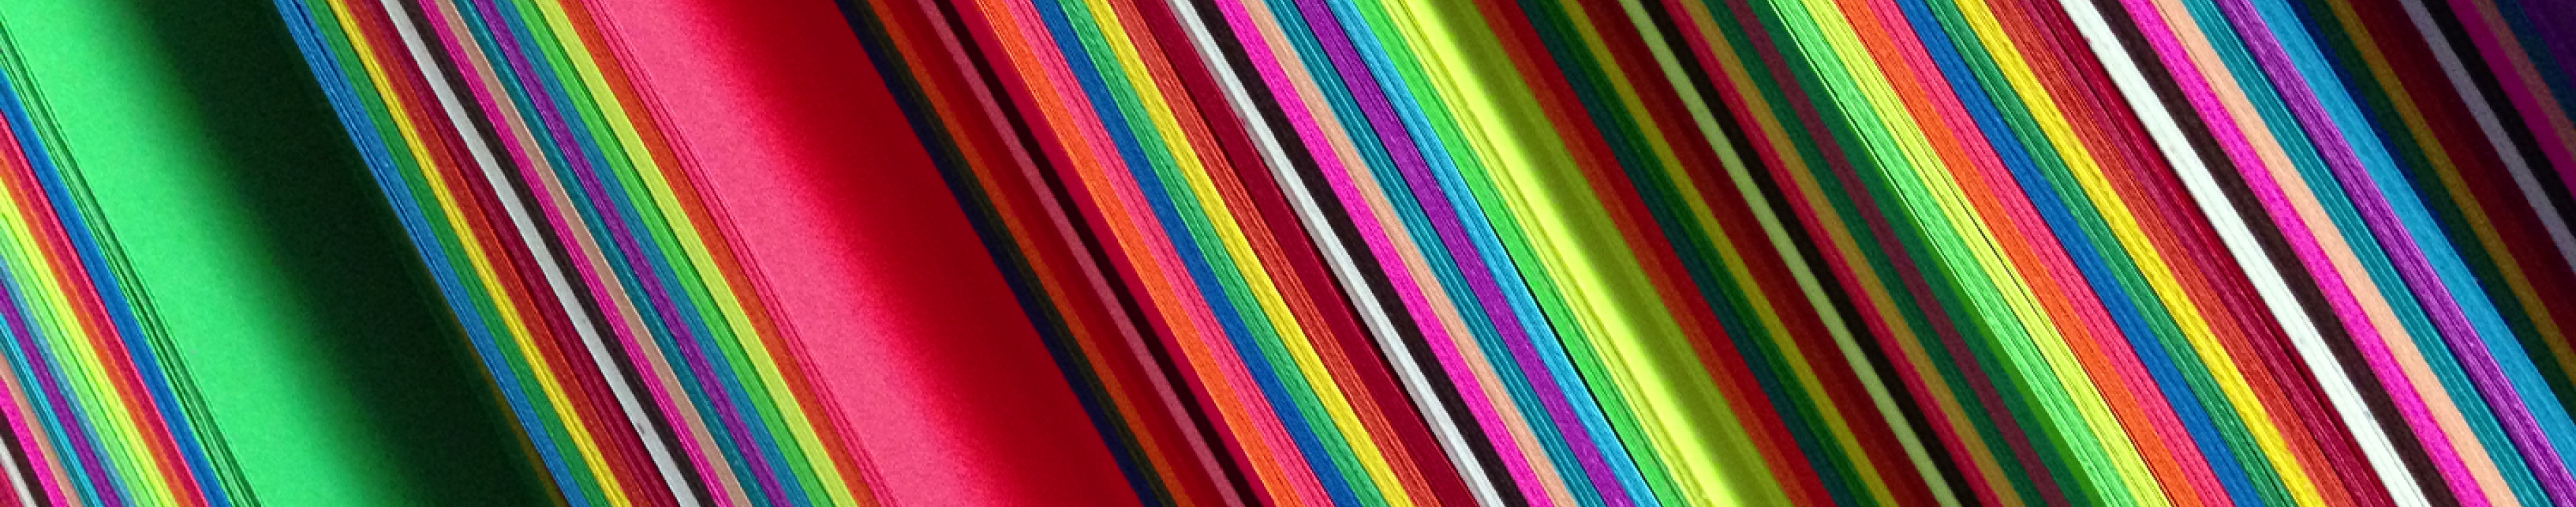 a close up photo of brightly colored paper